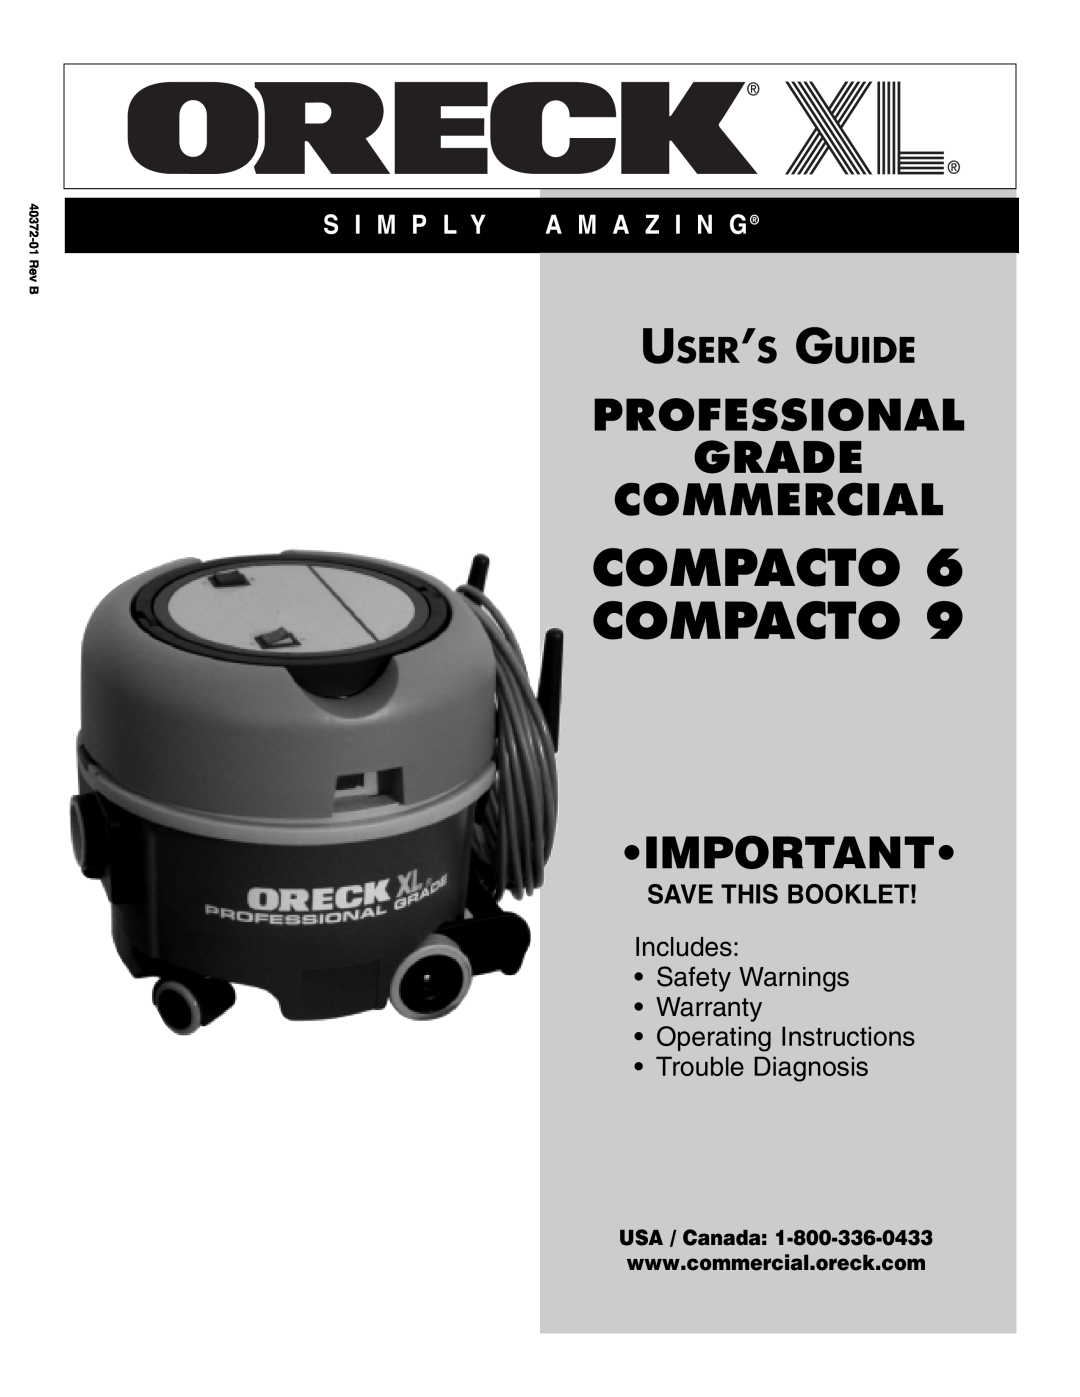 Oreck 6, 9 warranty User’S Guide, Save This Booklet, Compacto Compacto, Professional Grade Commercial, 40372-01Rev B 